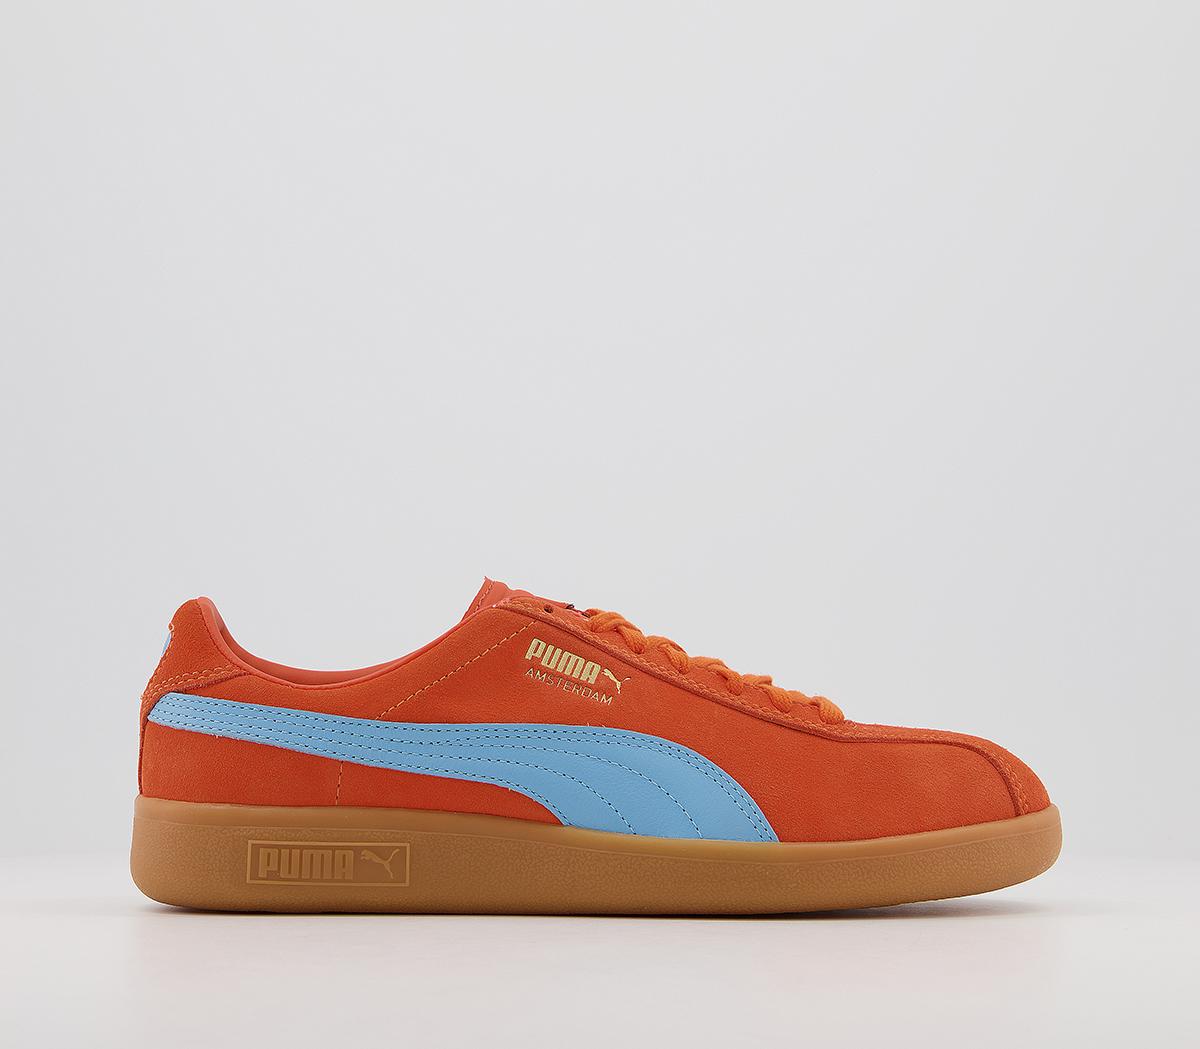 Puma Trainers Amsterdam Ethereal Blue - Unisex Sports